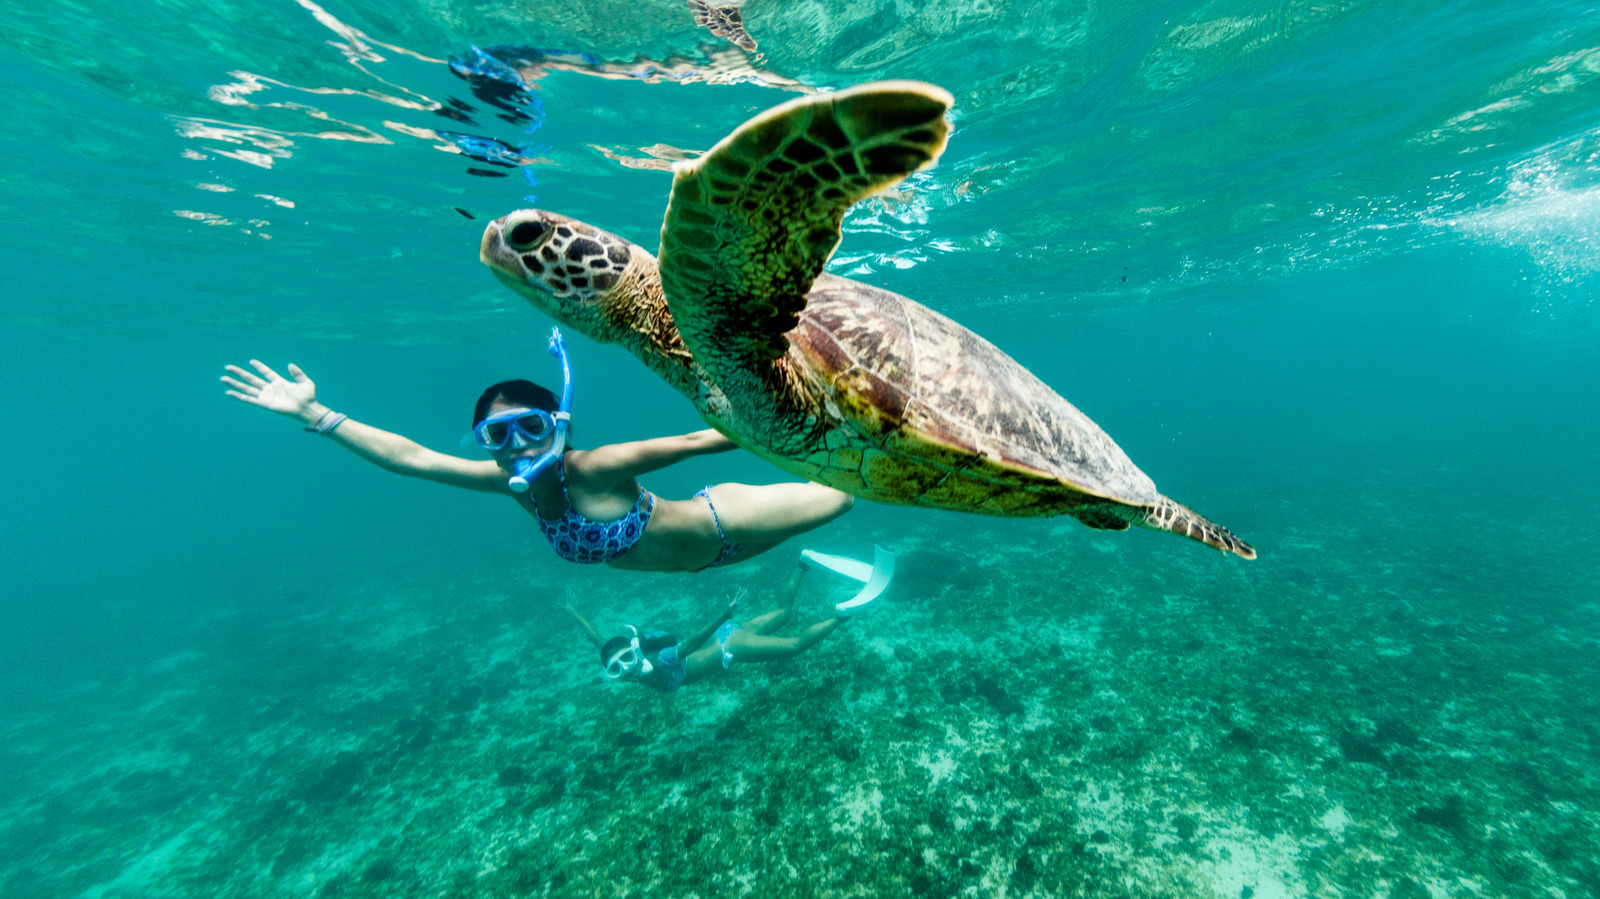 15 Most Breathtaking Destinations To Swim With Turtles, According To Travelers  